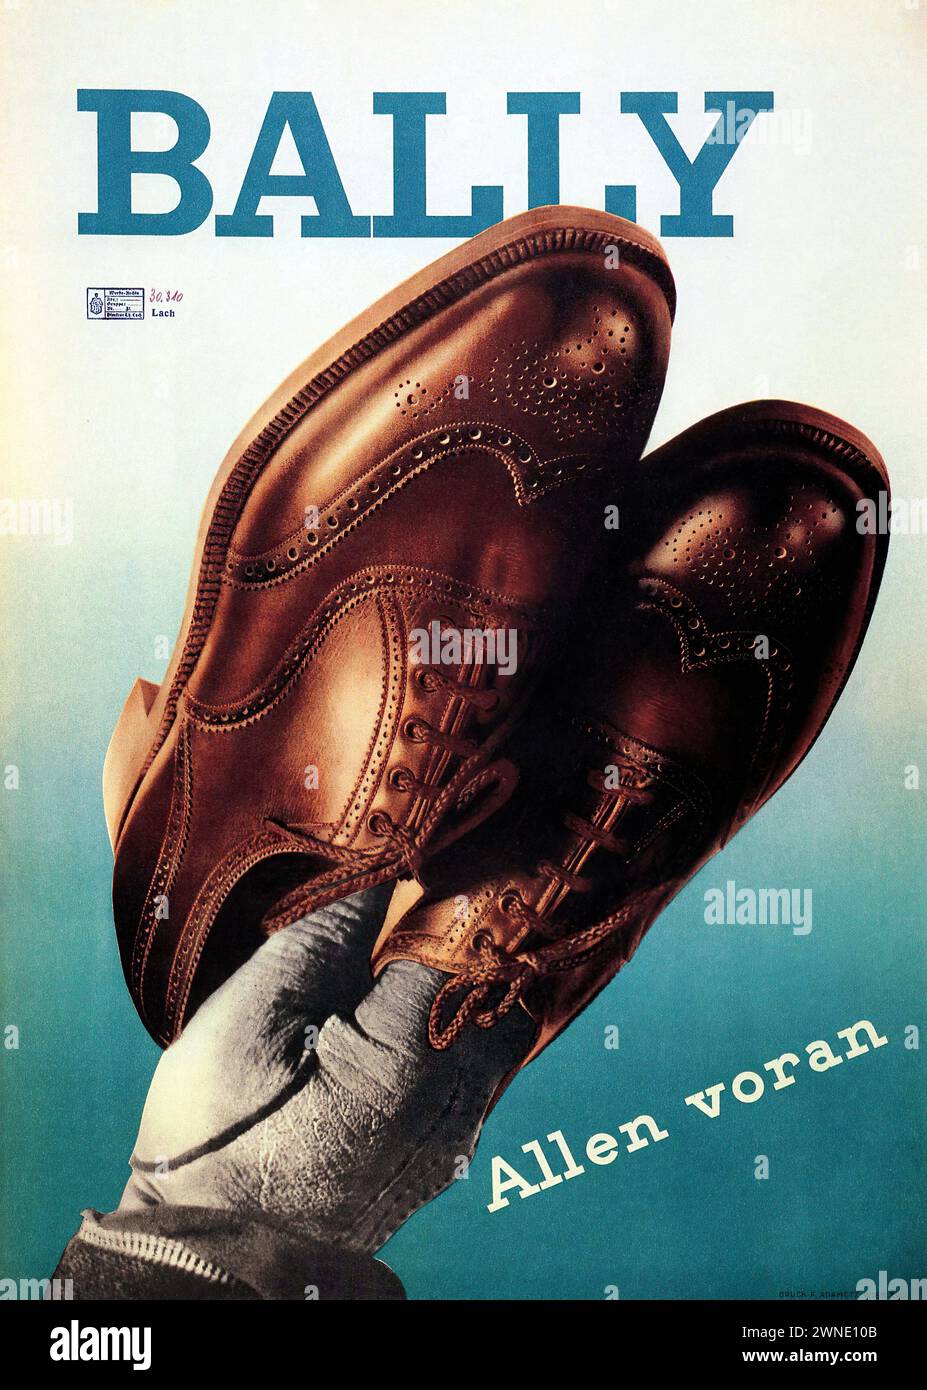 'BALLY Allen voran' ['BALLY All ahead'] Vintage Advertising. The image shows a pair of Bally shoes, with the focus on the detail and craftsmanship. The background is a cool blue, with a modernist style and clean lines indicative of the 1930s advertising. Stock Photo